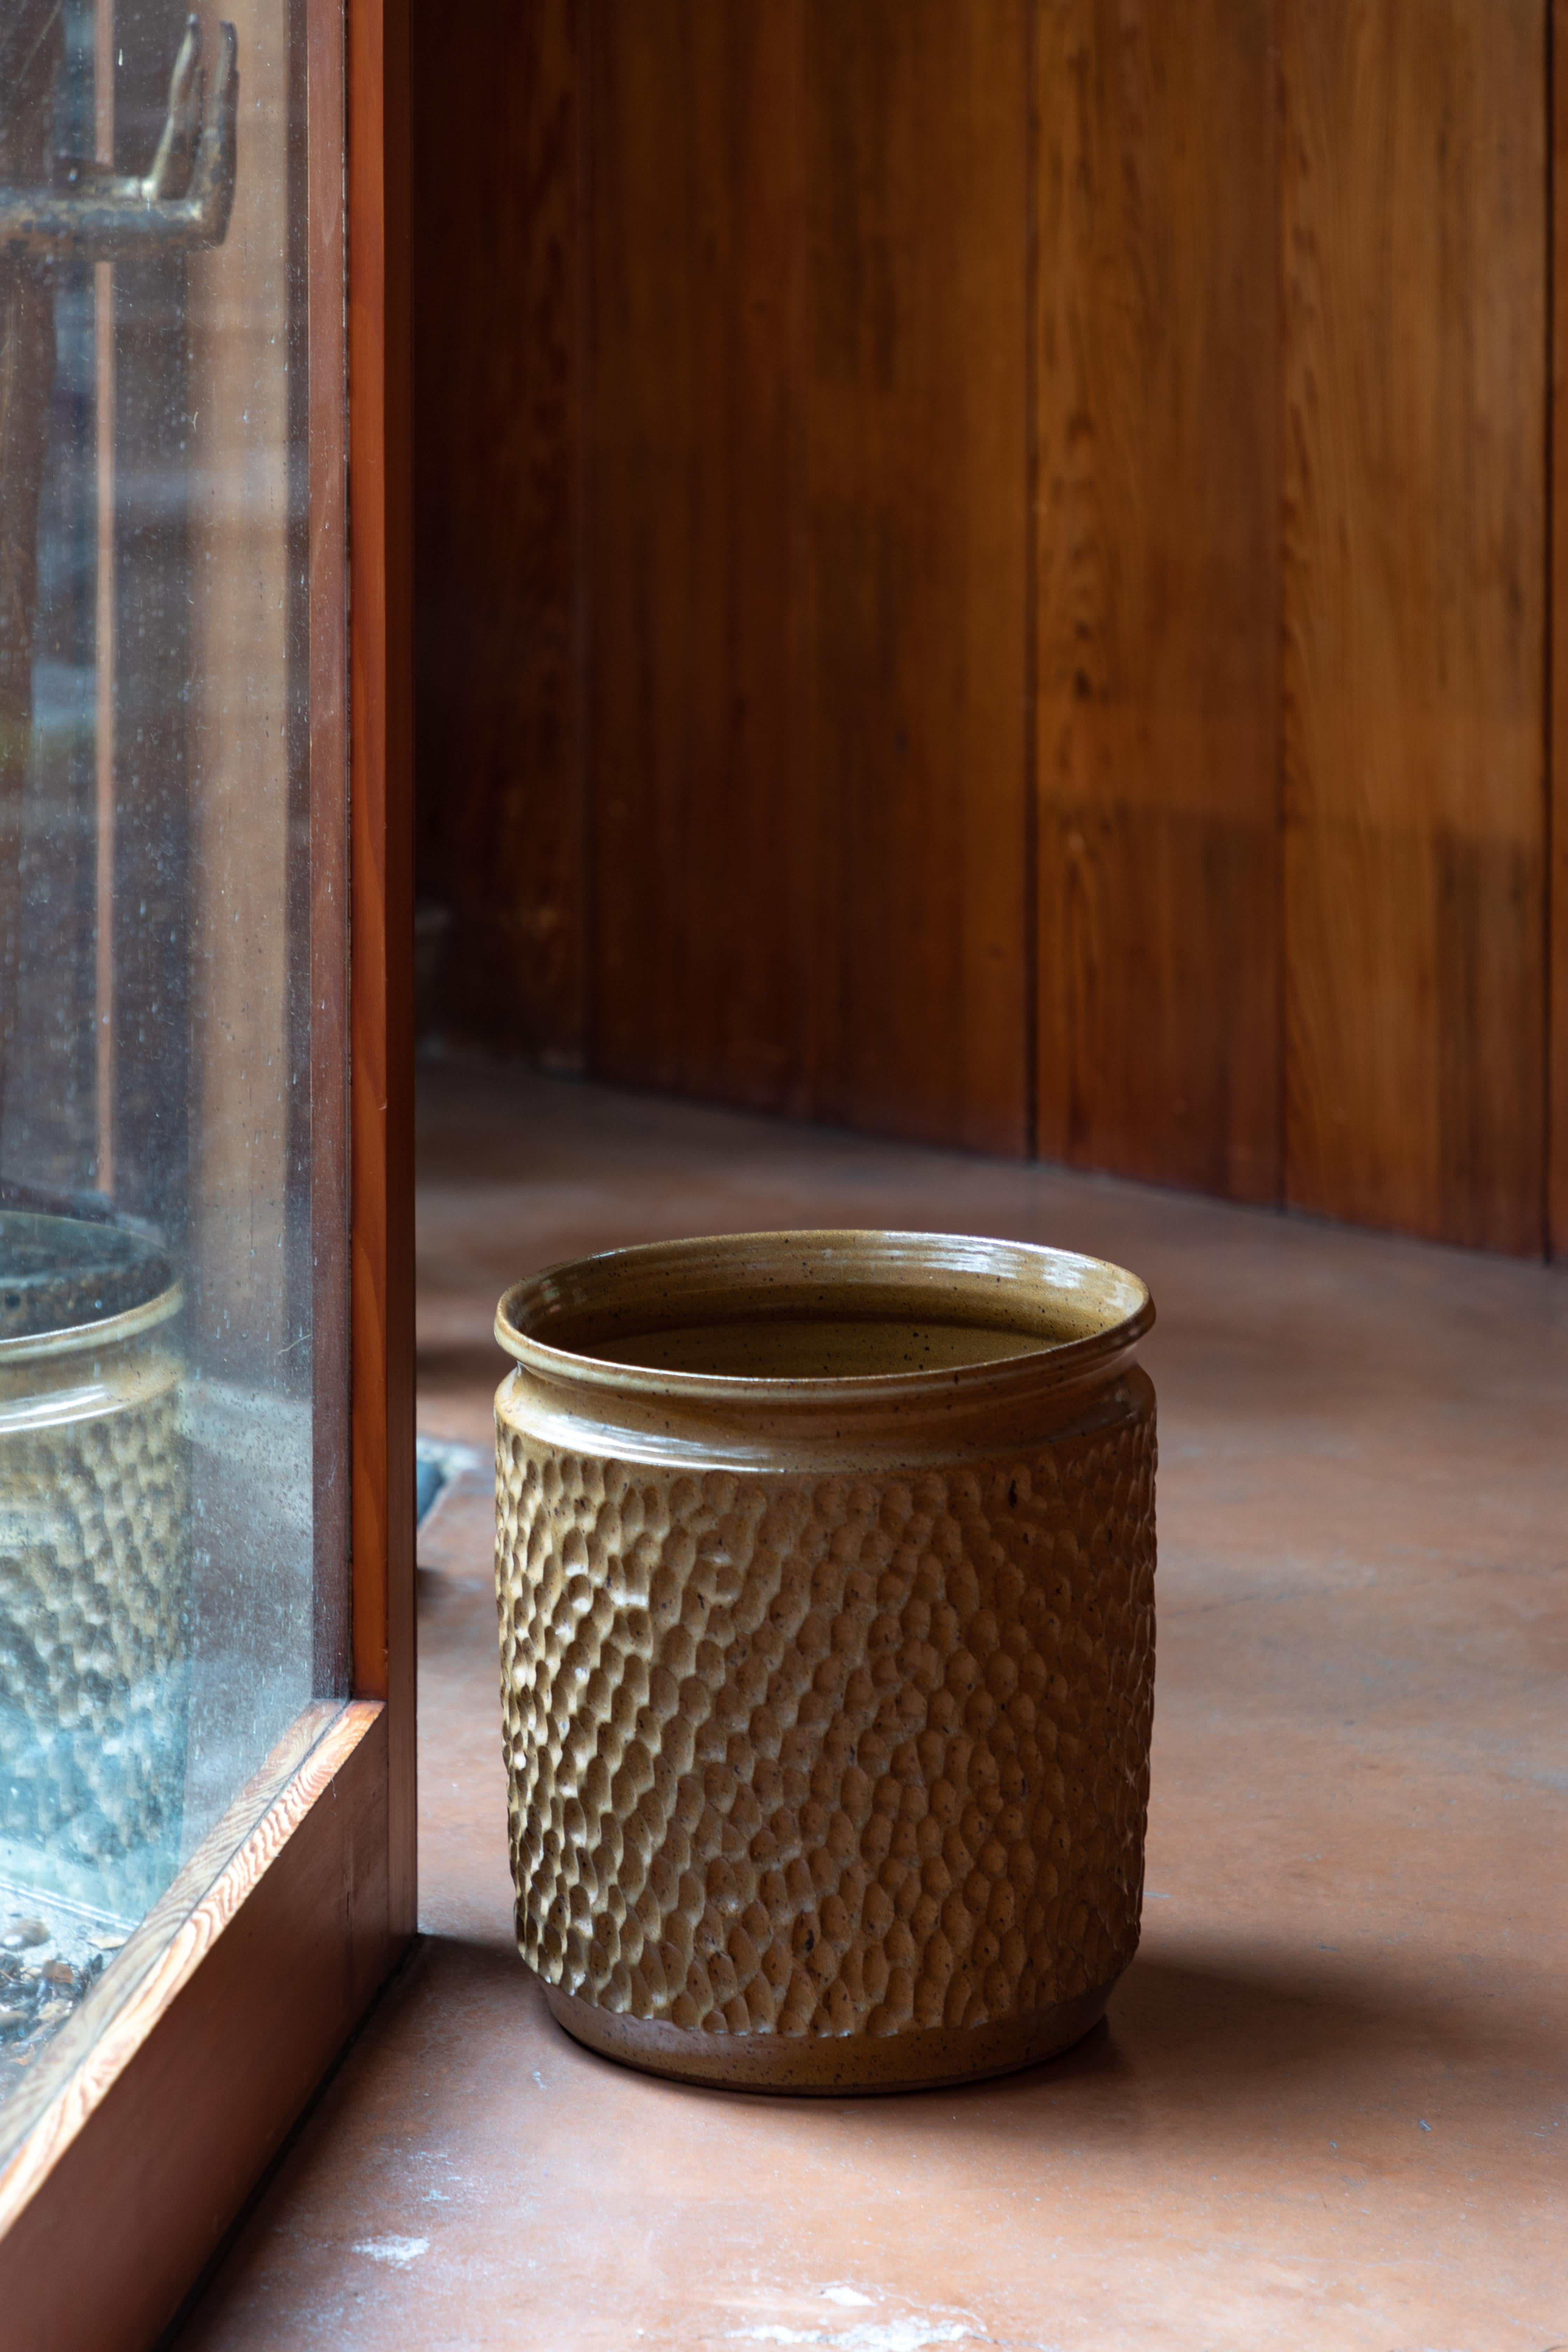 Large Robert Maxwell & David Cressey thumbprint planter for Earthgender. Executed in textured earthenware with a stunning brown coloration with glaze. A very clean example of an increasingly rare and collectible design collective that only existed